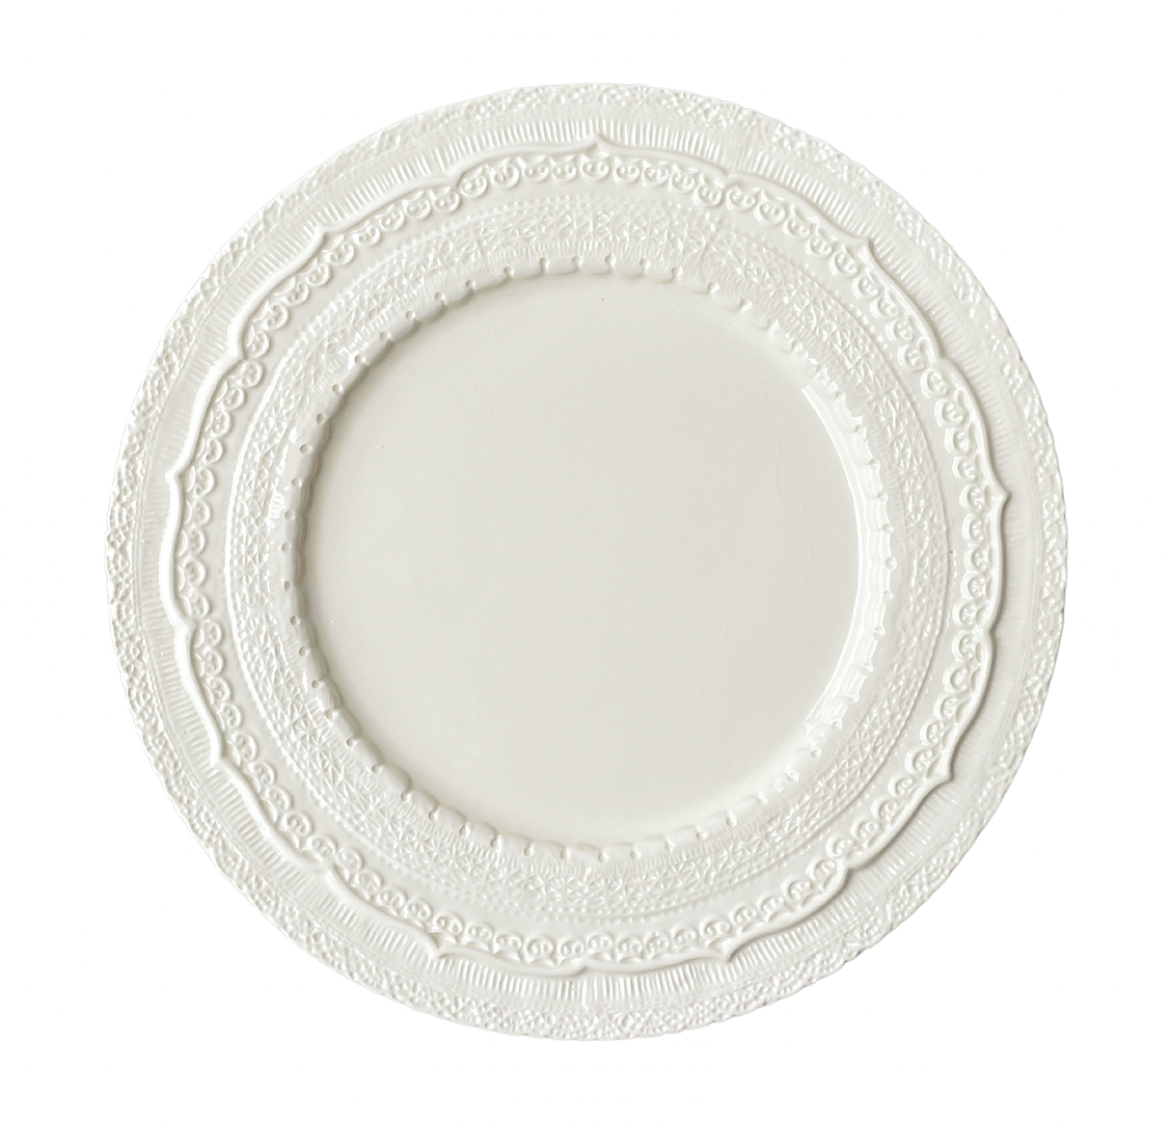 Ivory Lace Charger Plate Hire